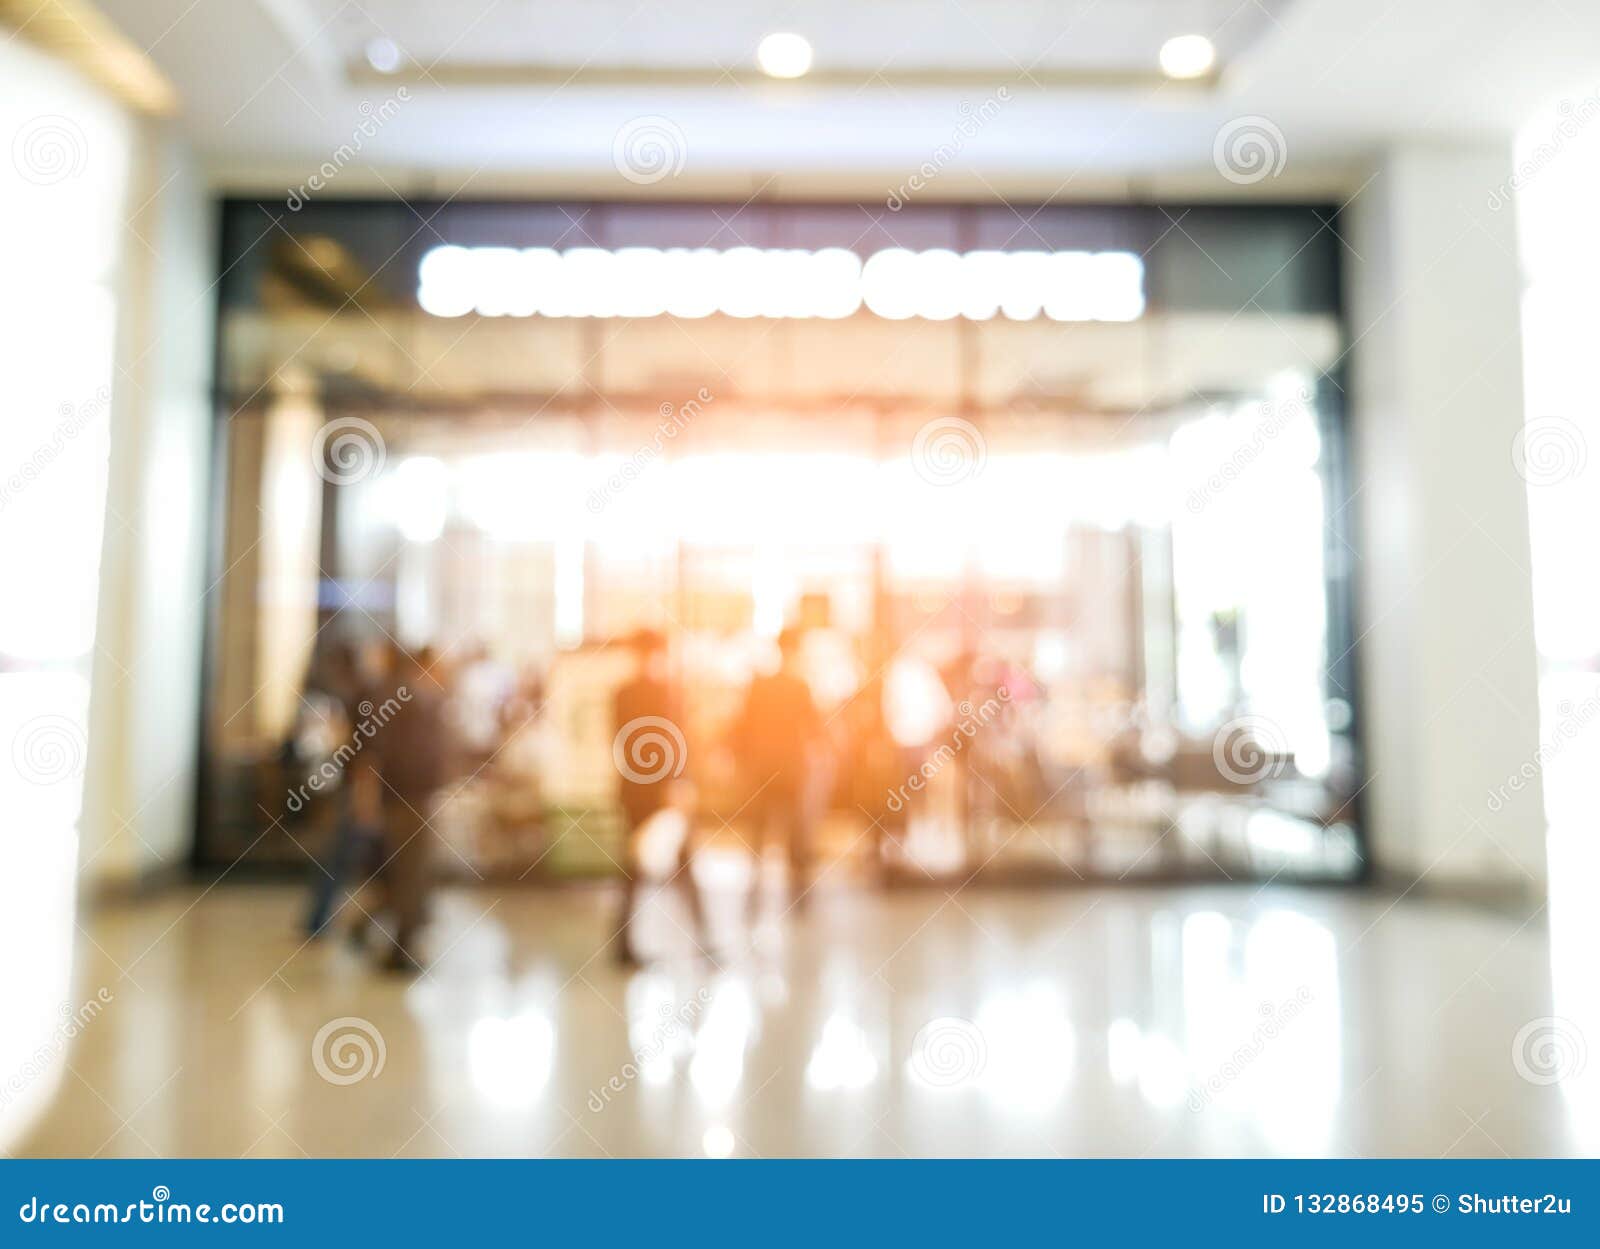 blurry background of coffee shop and crowd people. abstract and